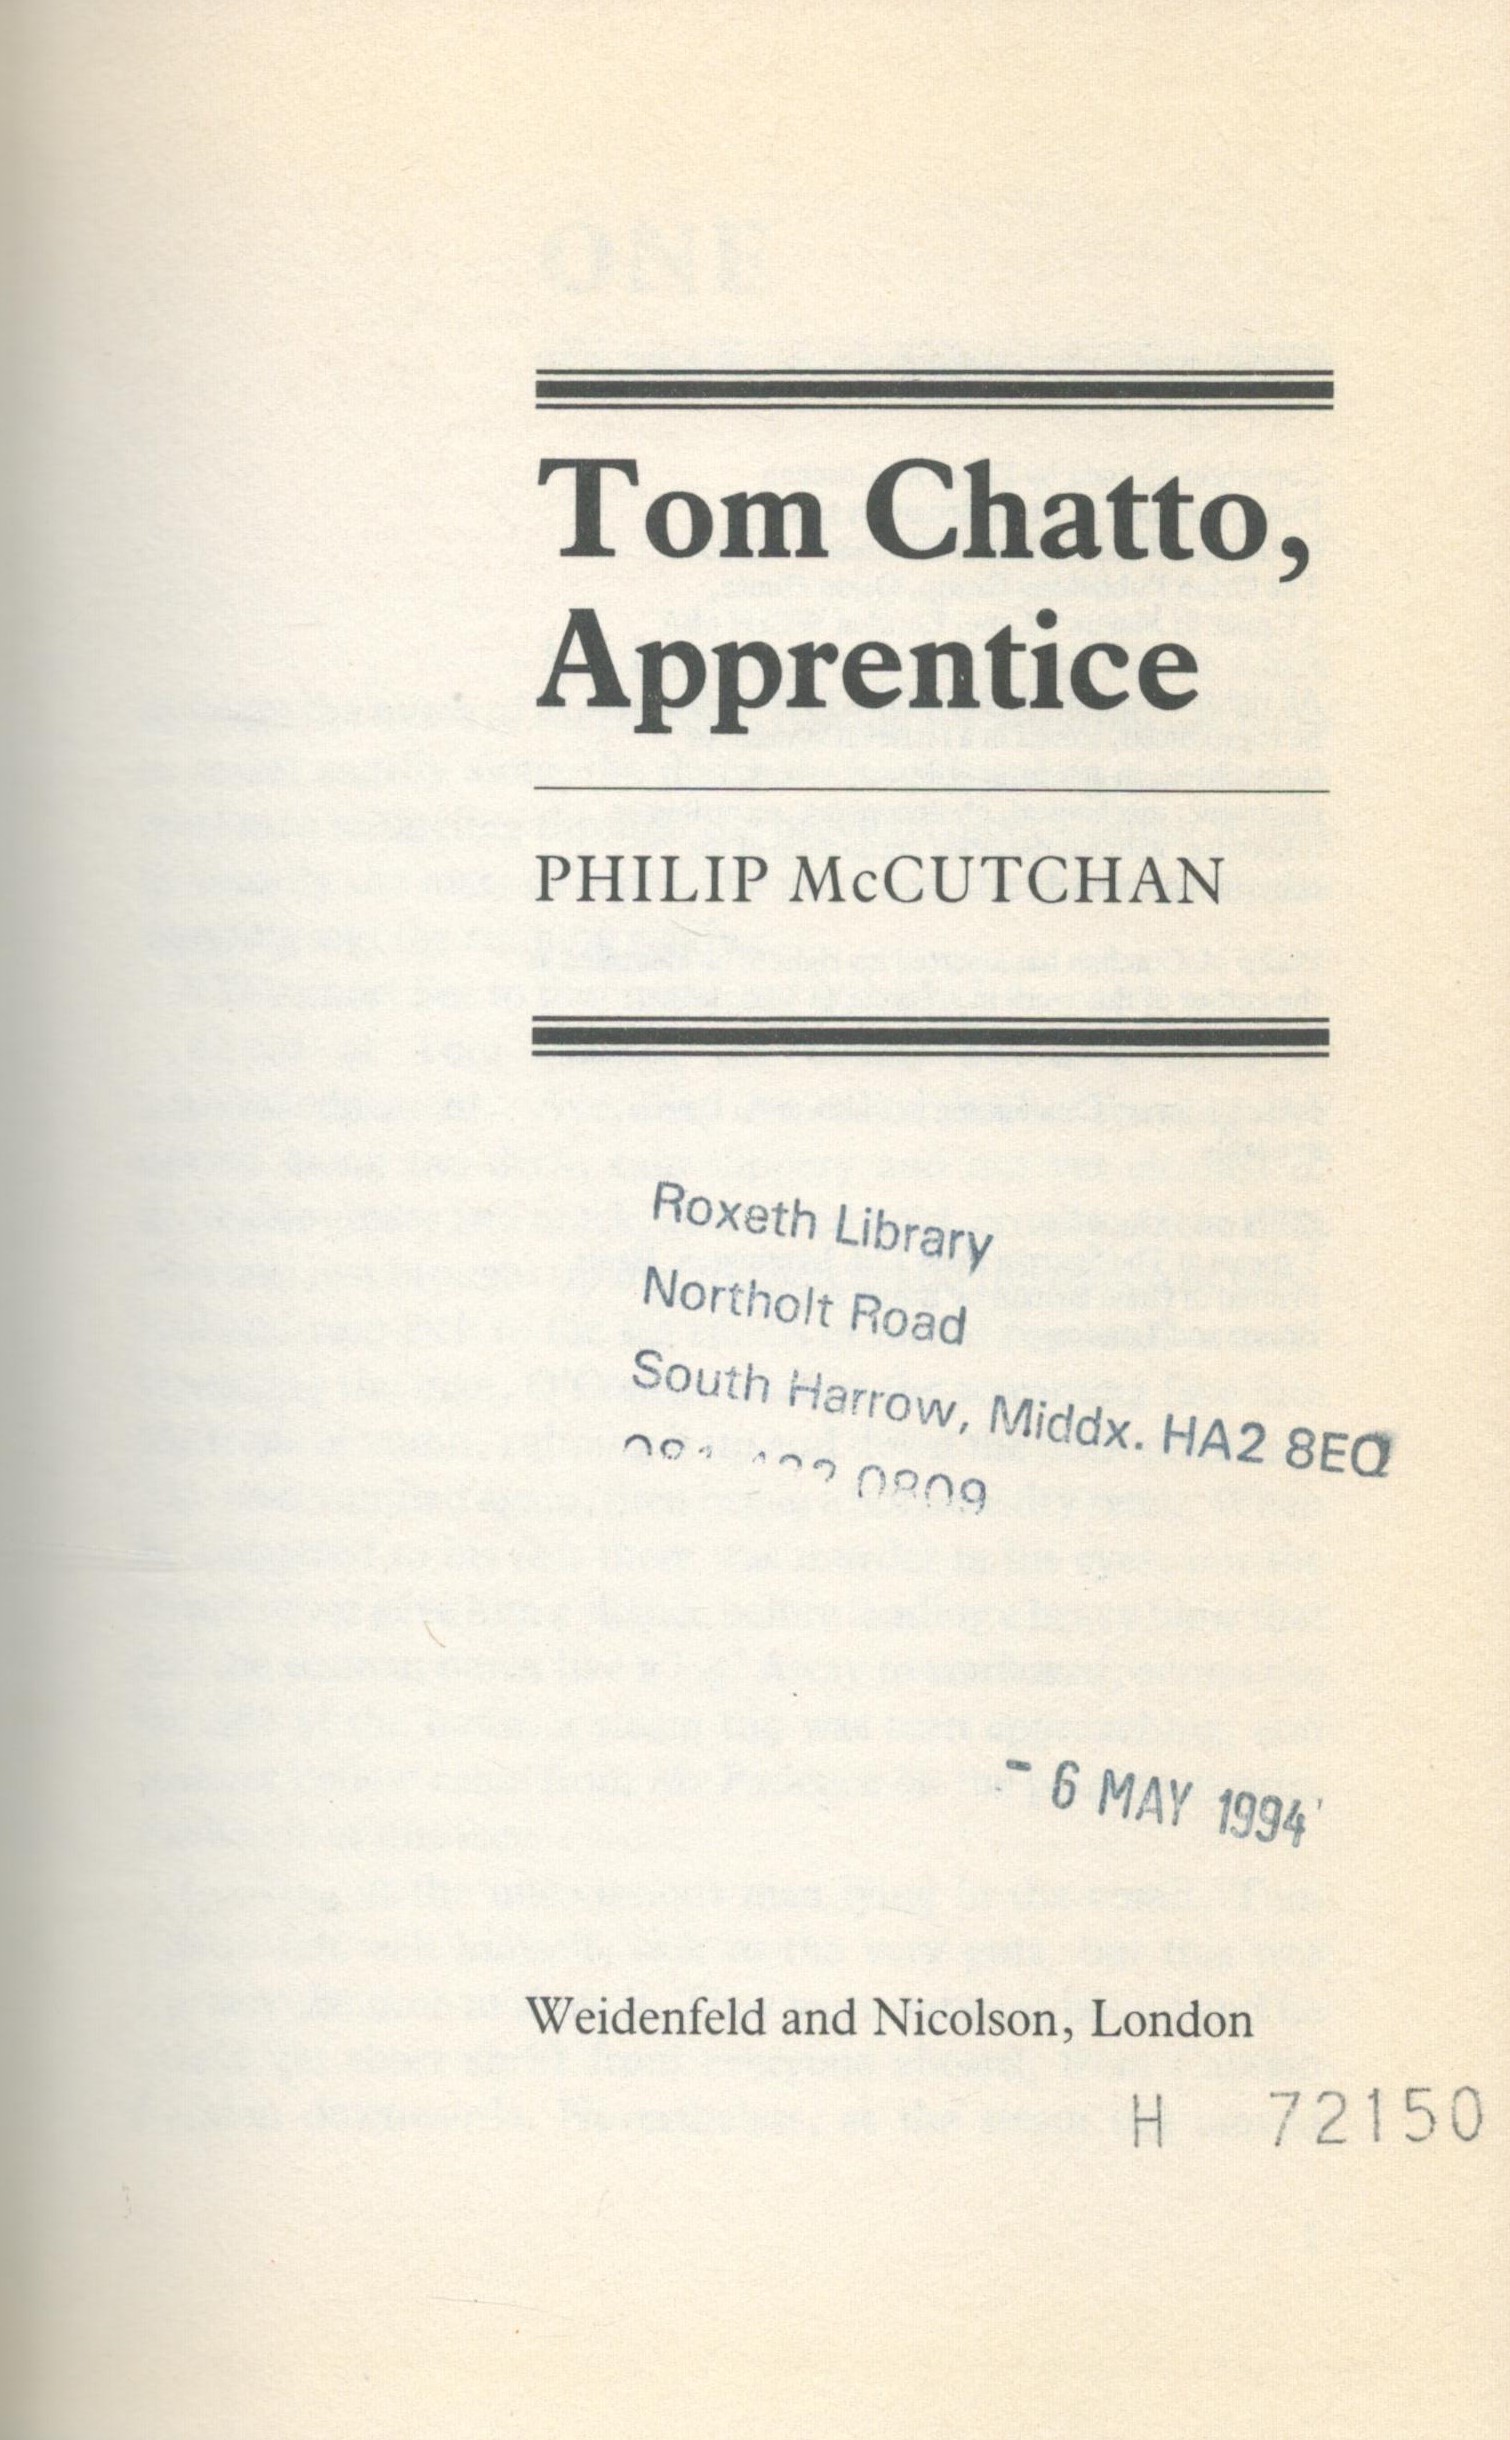 Tom Chatto, Apprentice by Philip McCutchan 1994 First Edition Hardback Book with 183 pages published - Image 2 of 3